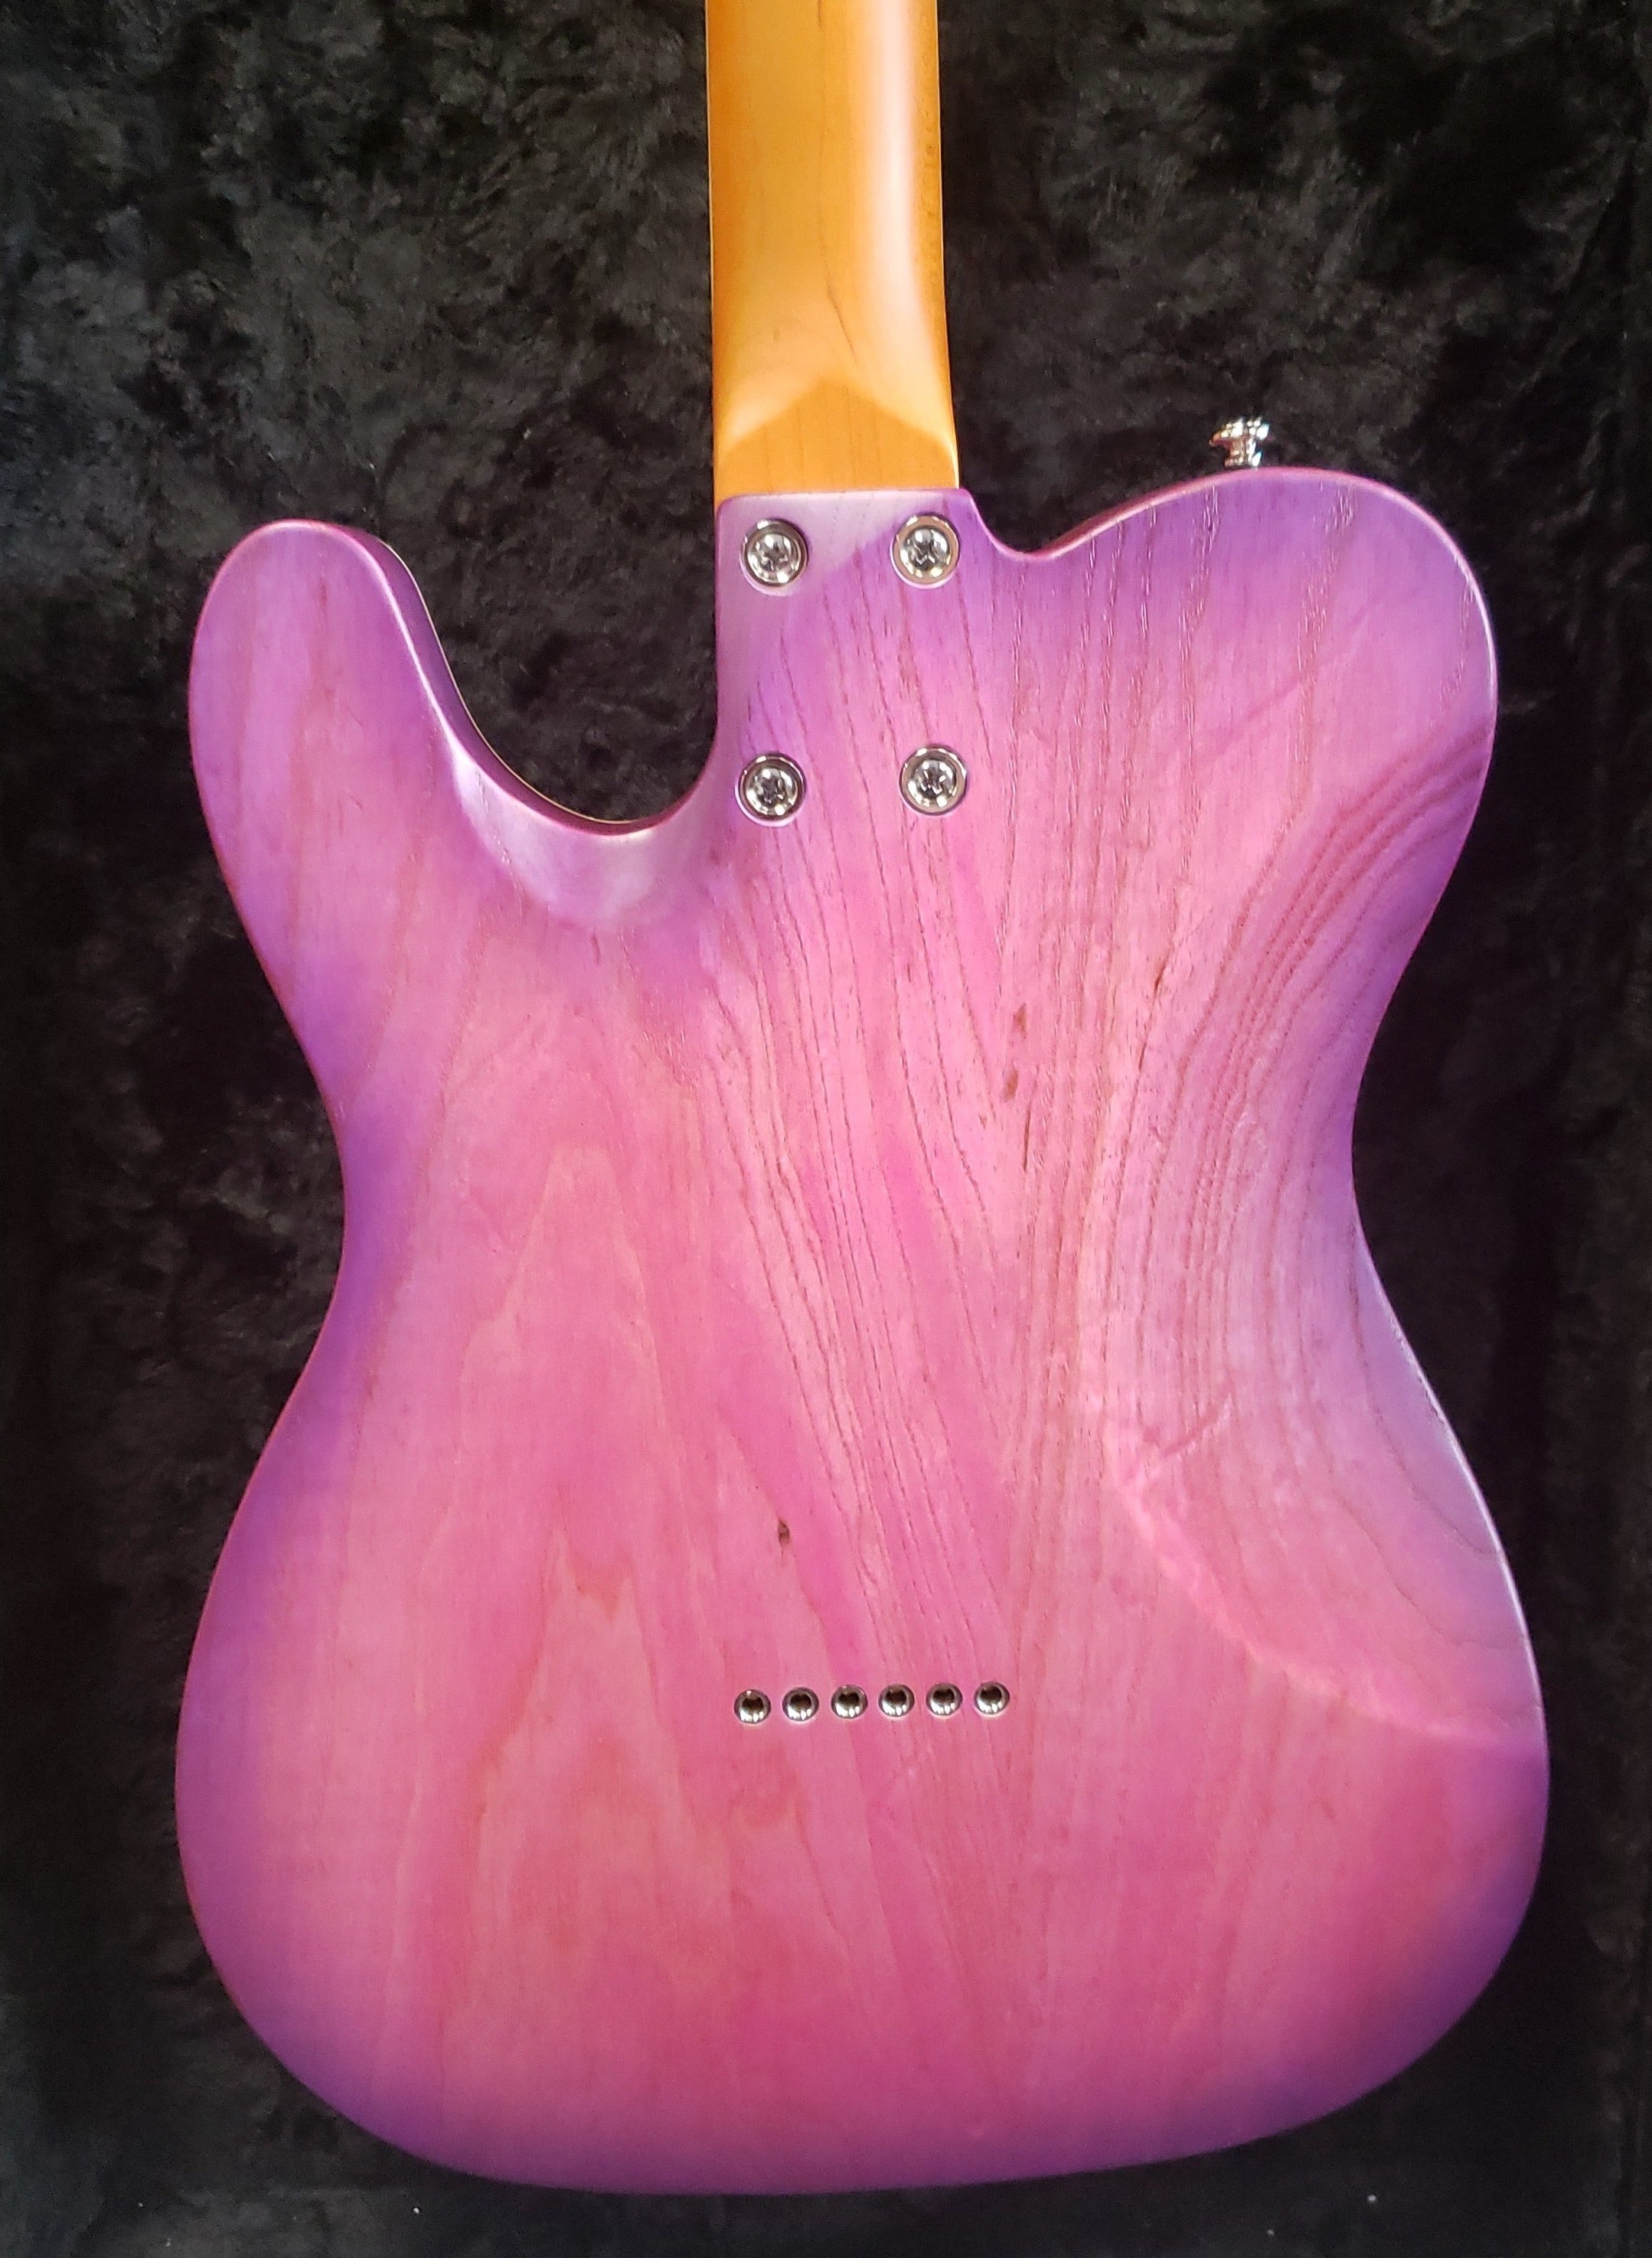 Schecter PT Special Electric Guitar Purple Burst Pearl 667-SHC SERIAL NUMBER W2100473 - 7.0 LBS